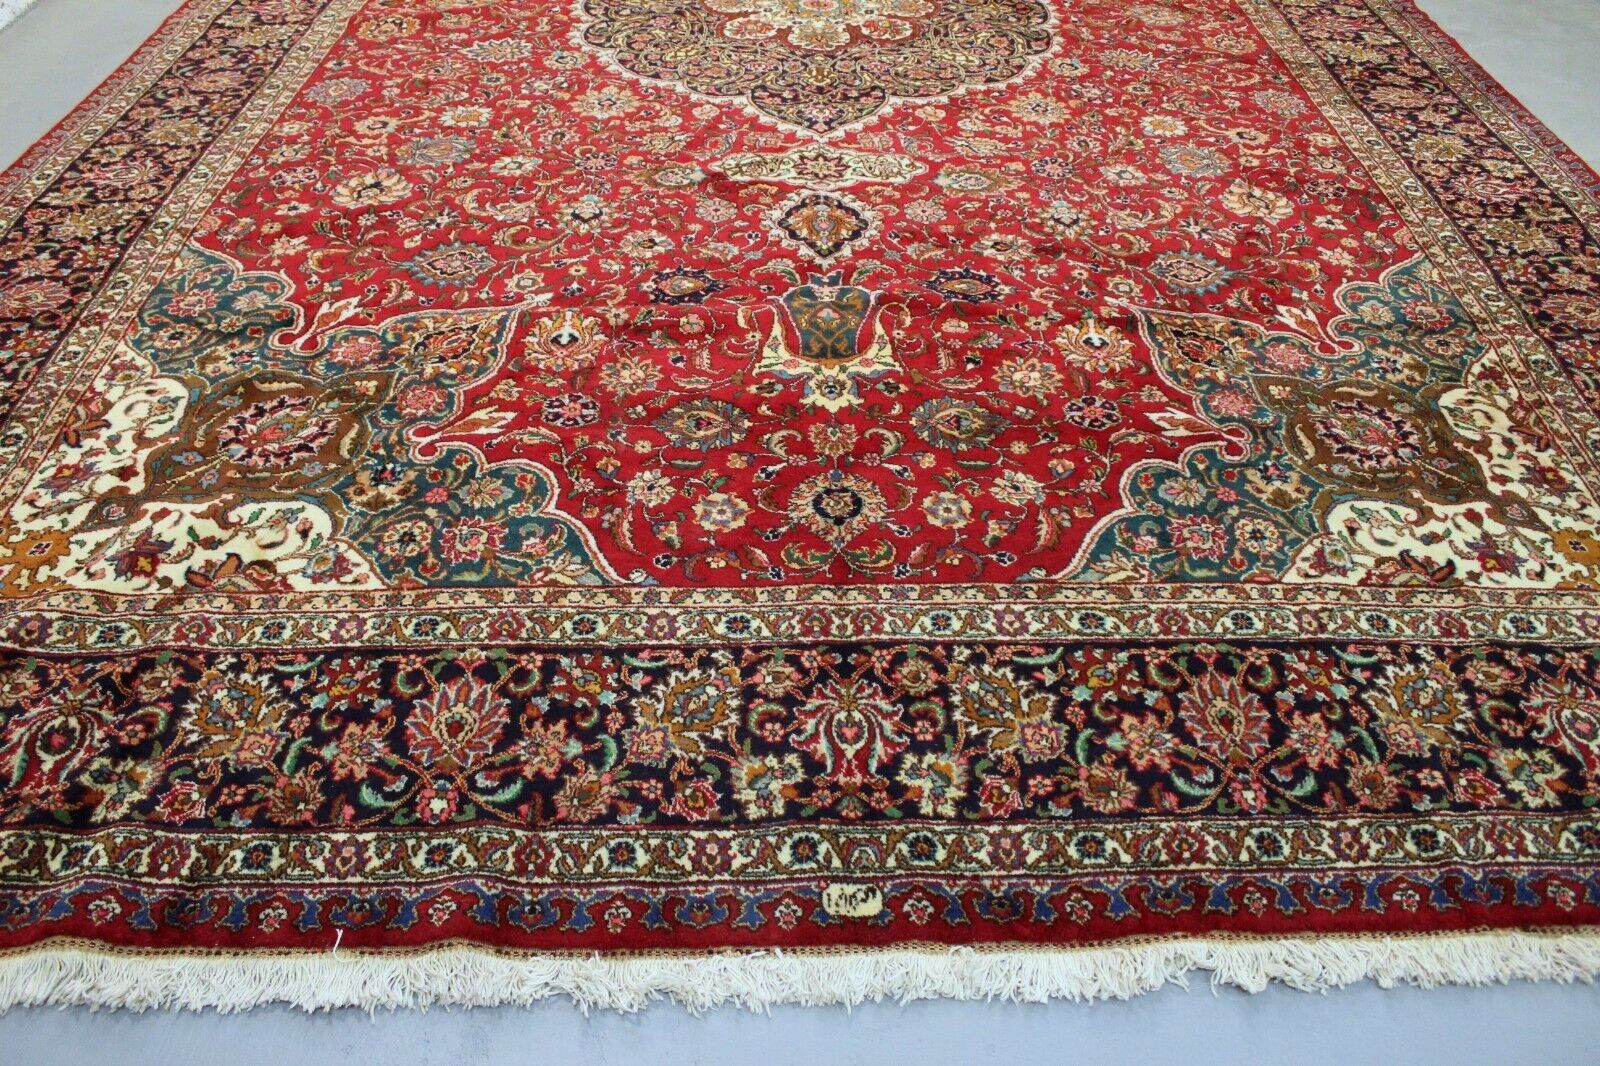 Intricate Floral and Geometric Motifs Meticulously Woven on Vintage Persian Tabriz Oversize Rug - 1960s